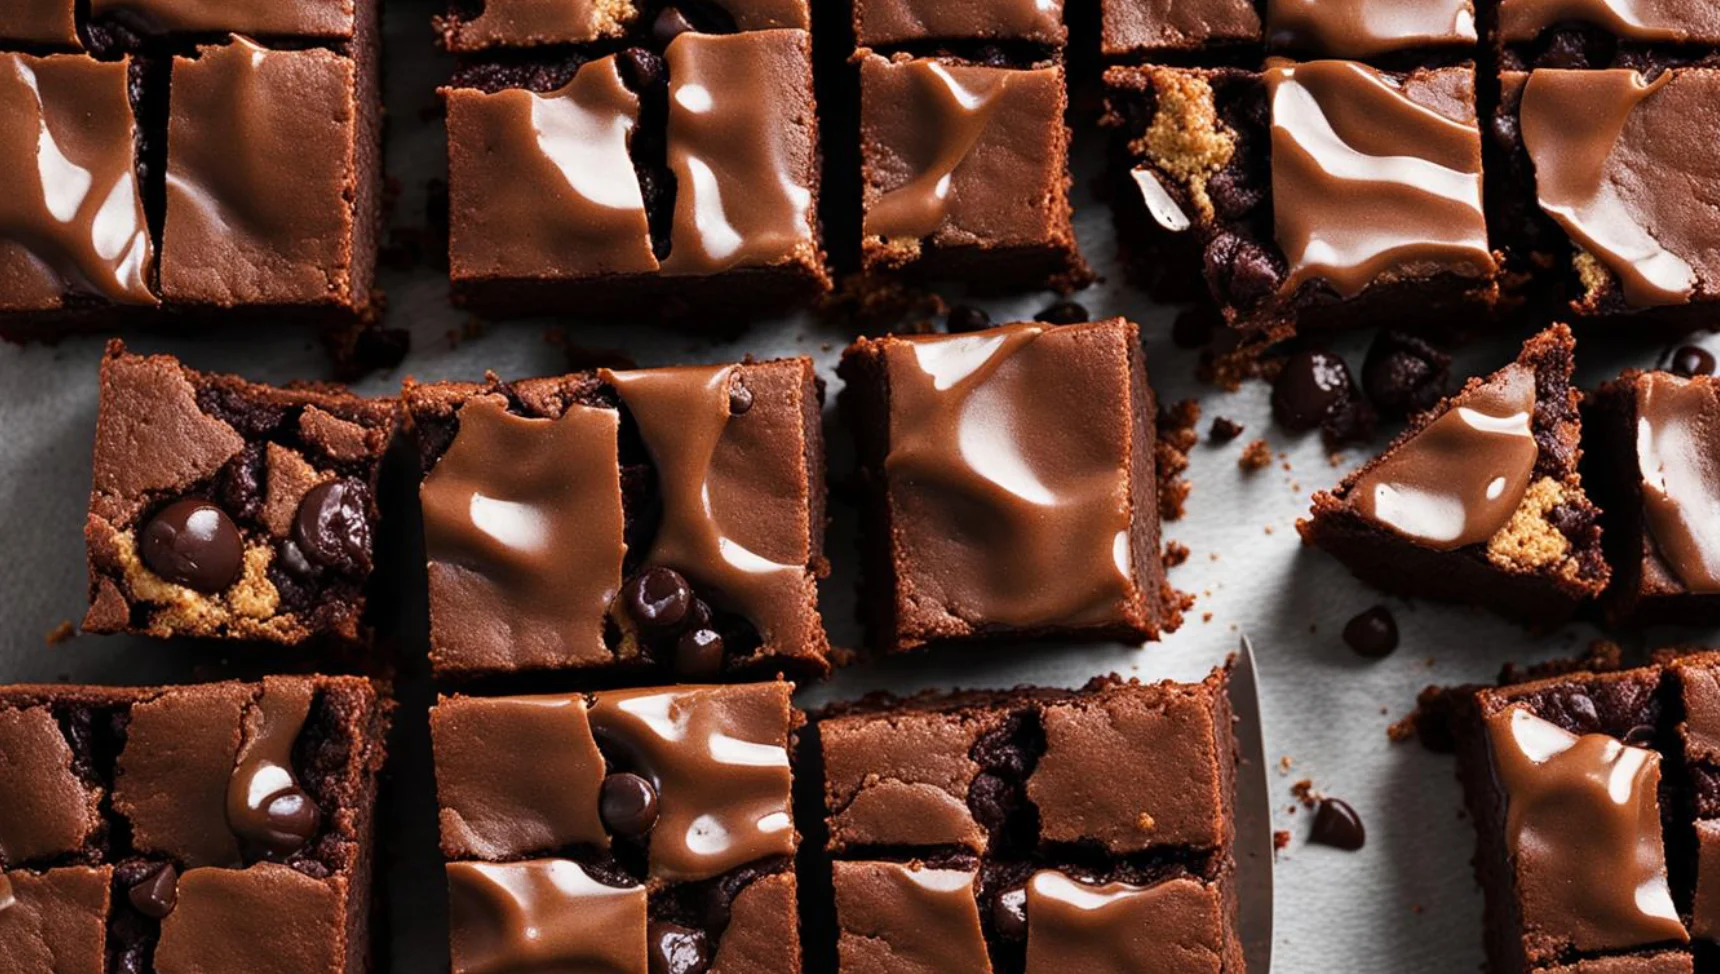 Sweet Treat Alert: Here’s the Recipe for Brownies You’ll Love!